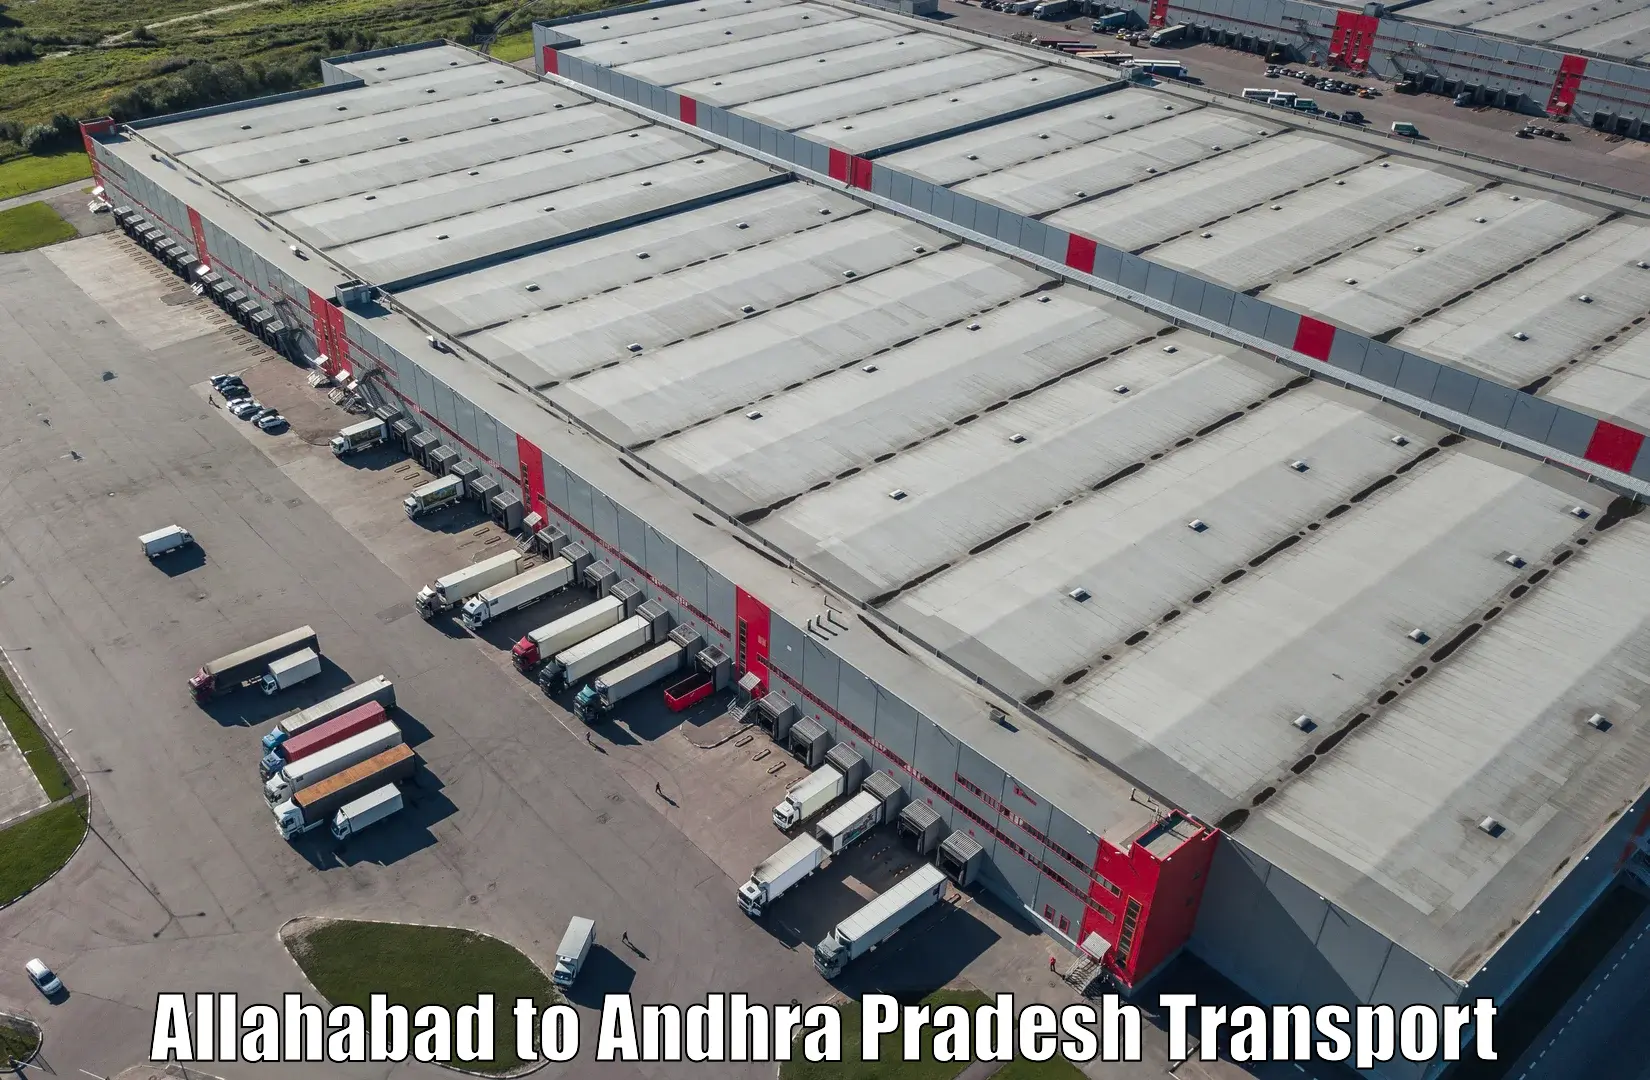 Material transport services Allahabad to Visakhapatnam Port